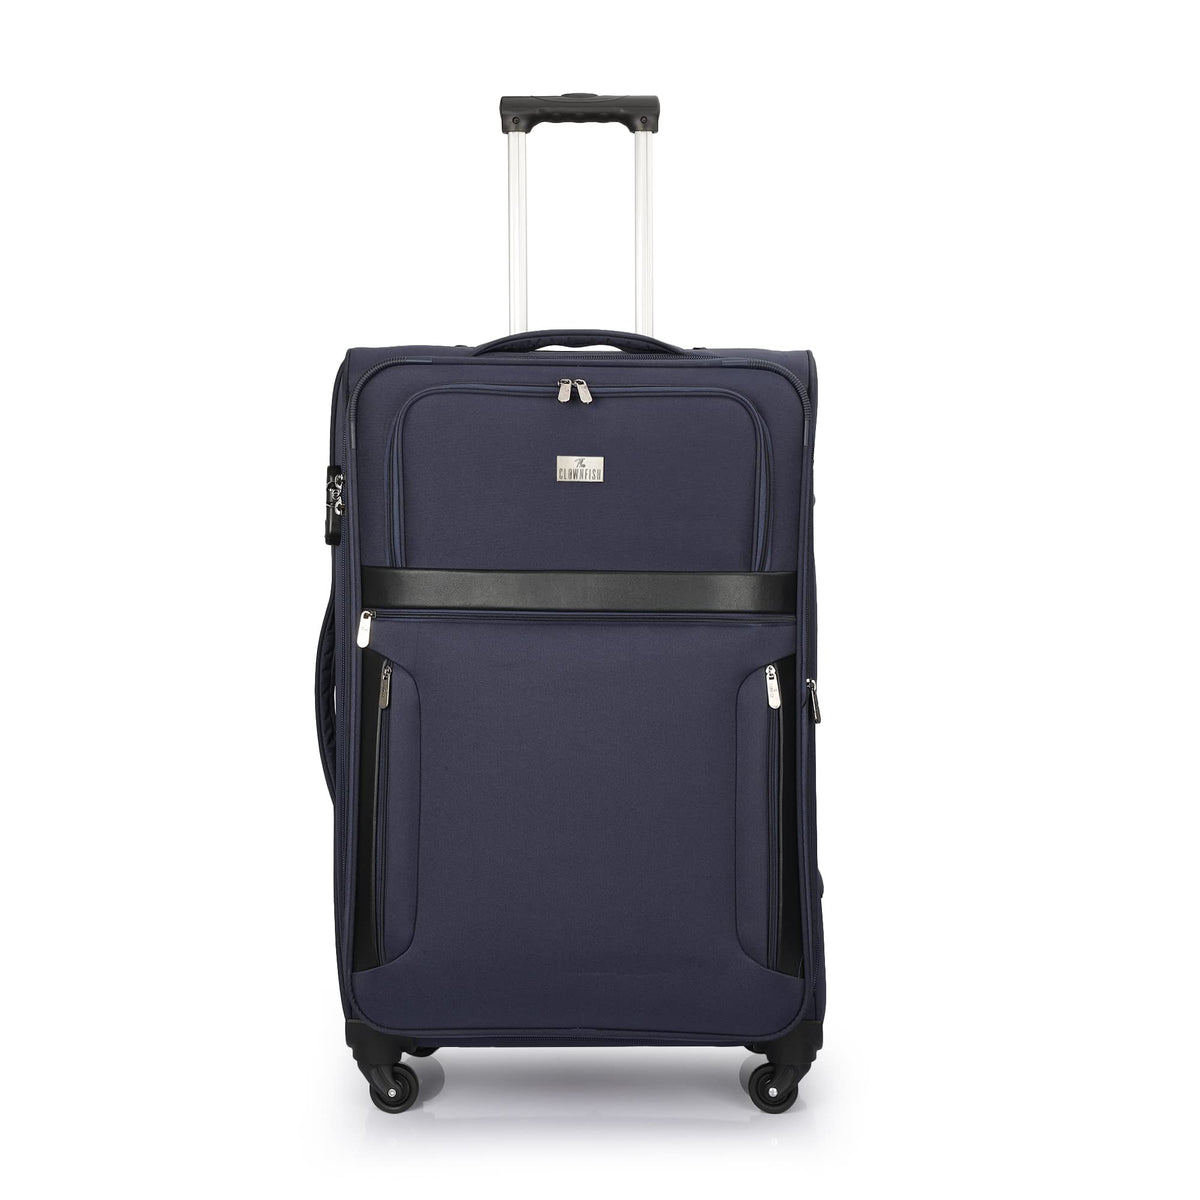 THE CLOWNFISH Faramund Series Luggage Polyester Softsided Suitcase Four Wheel Trolley Bag- Navy Blue (Large Size- 76 cm)